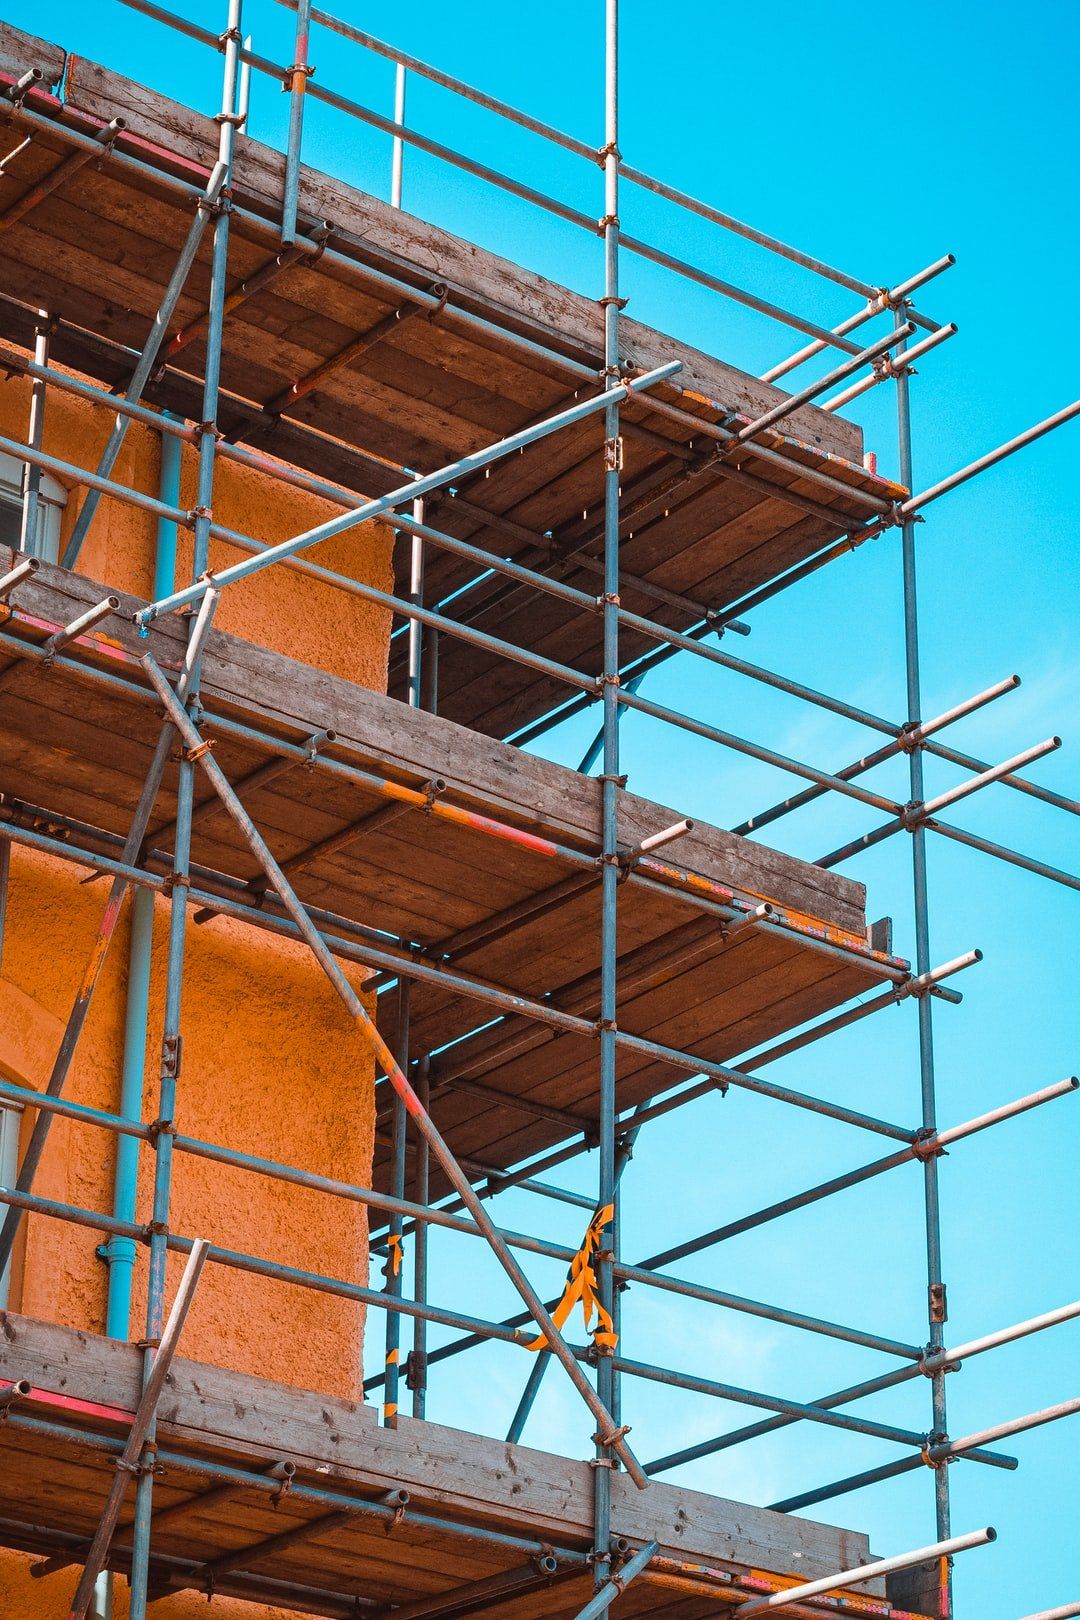 Construction financial losses are high but insolvencies are low. How will this unfold?